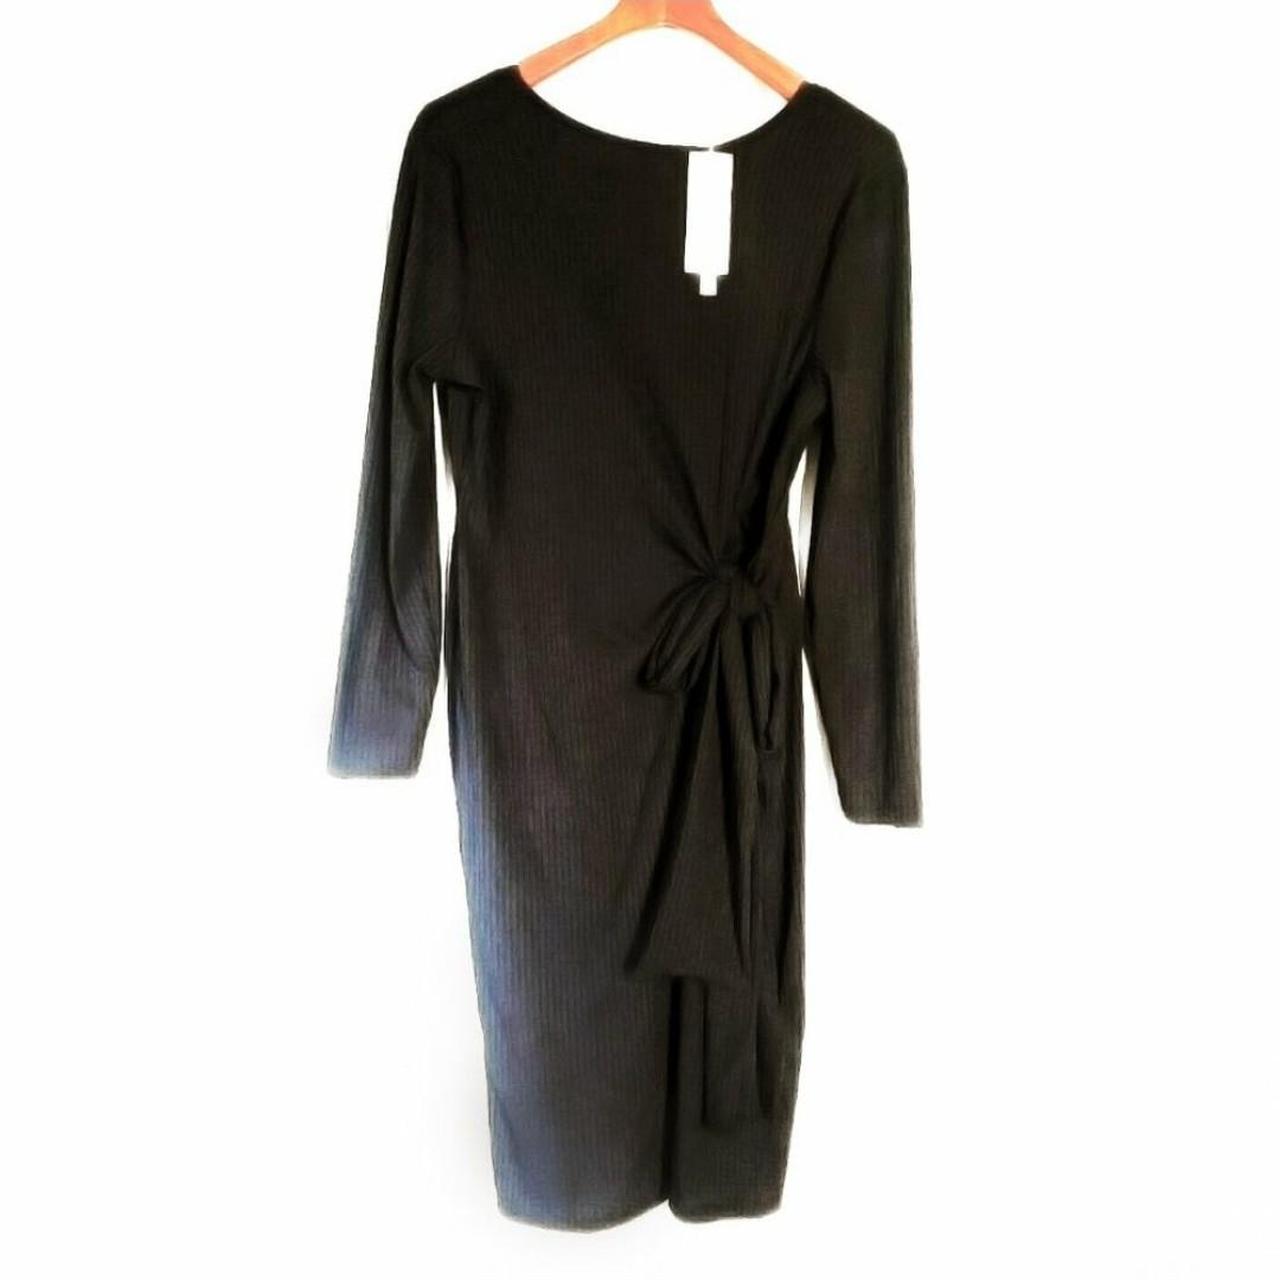 Product Image 2 - NWT Lost Ink Black Long